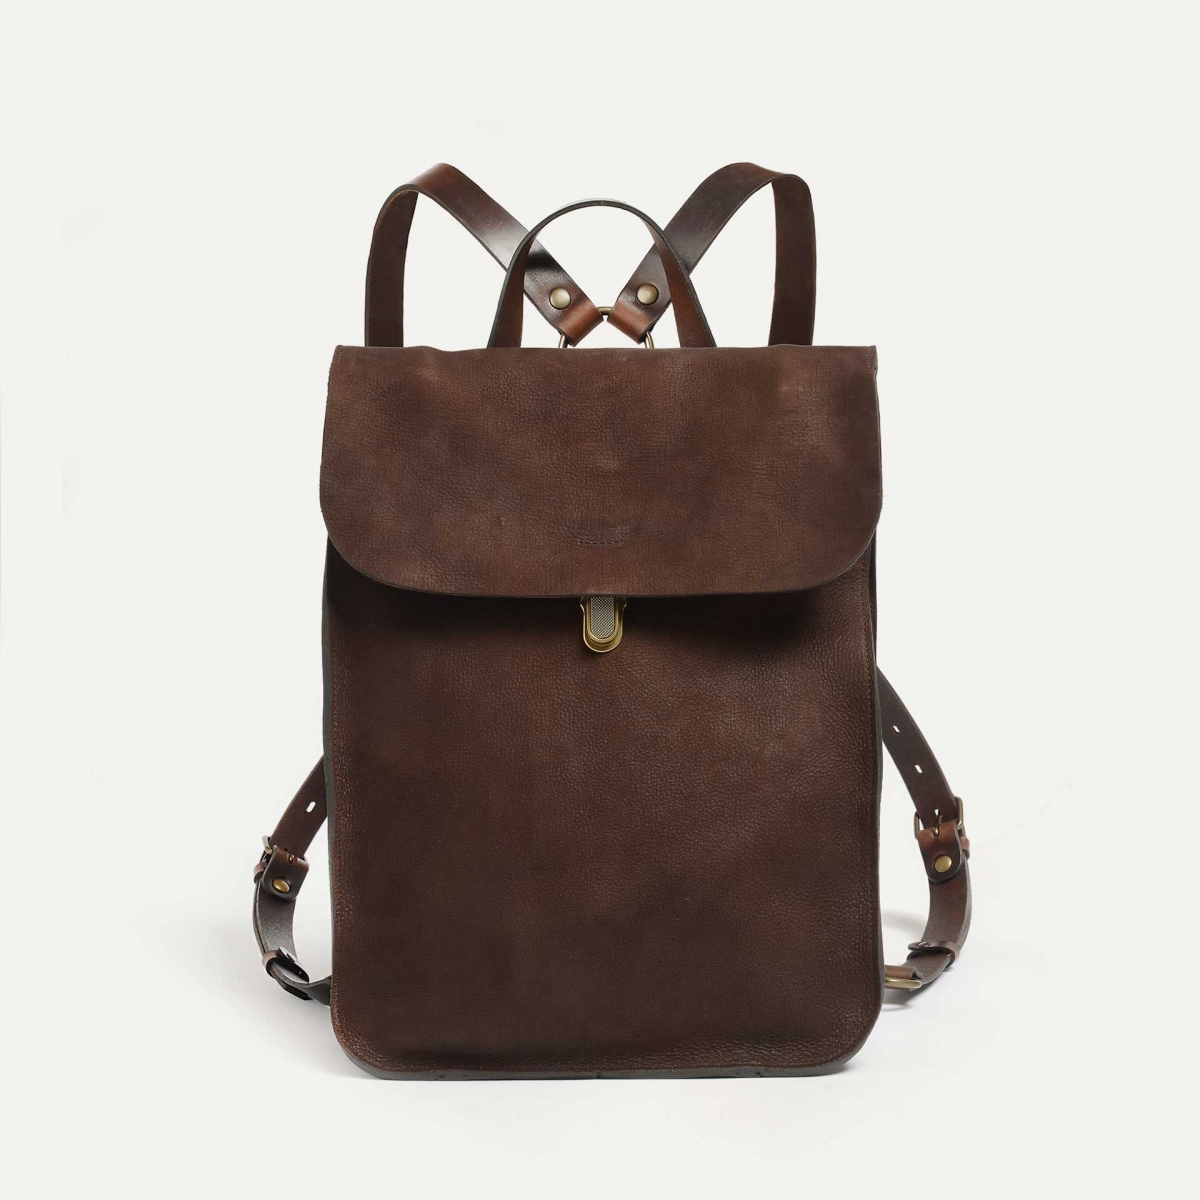 Puncho leather backpack - Coffee / Waxed Leather (image n°1)